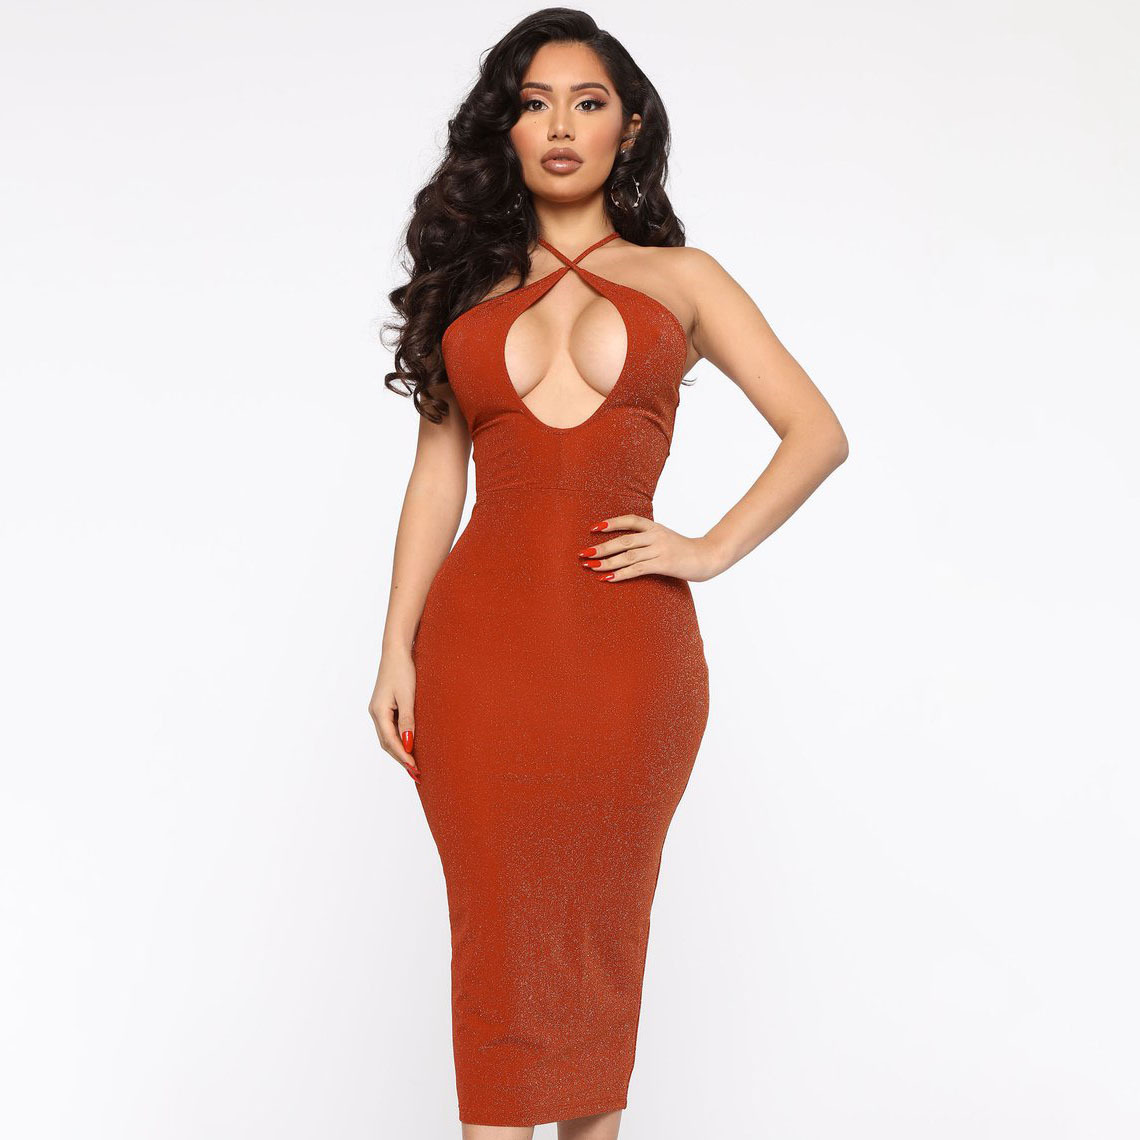 cross sling backless lace-up tight wrap chest solid color dress NSHBG122644